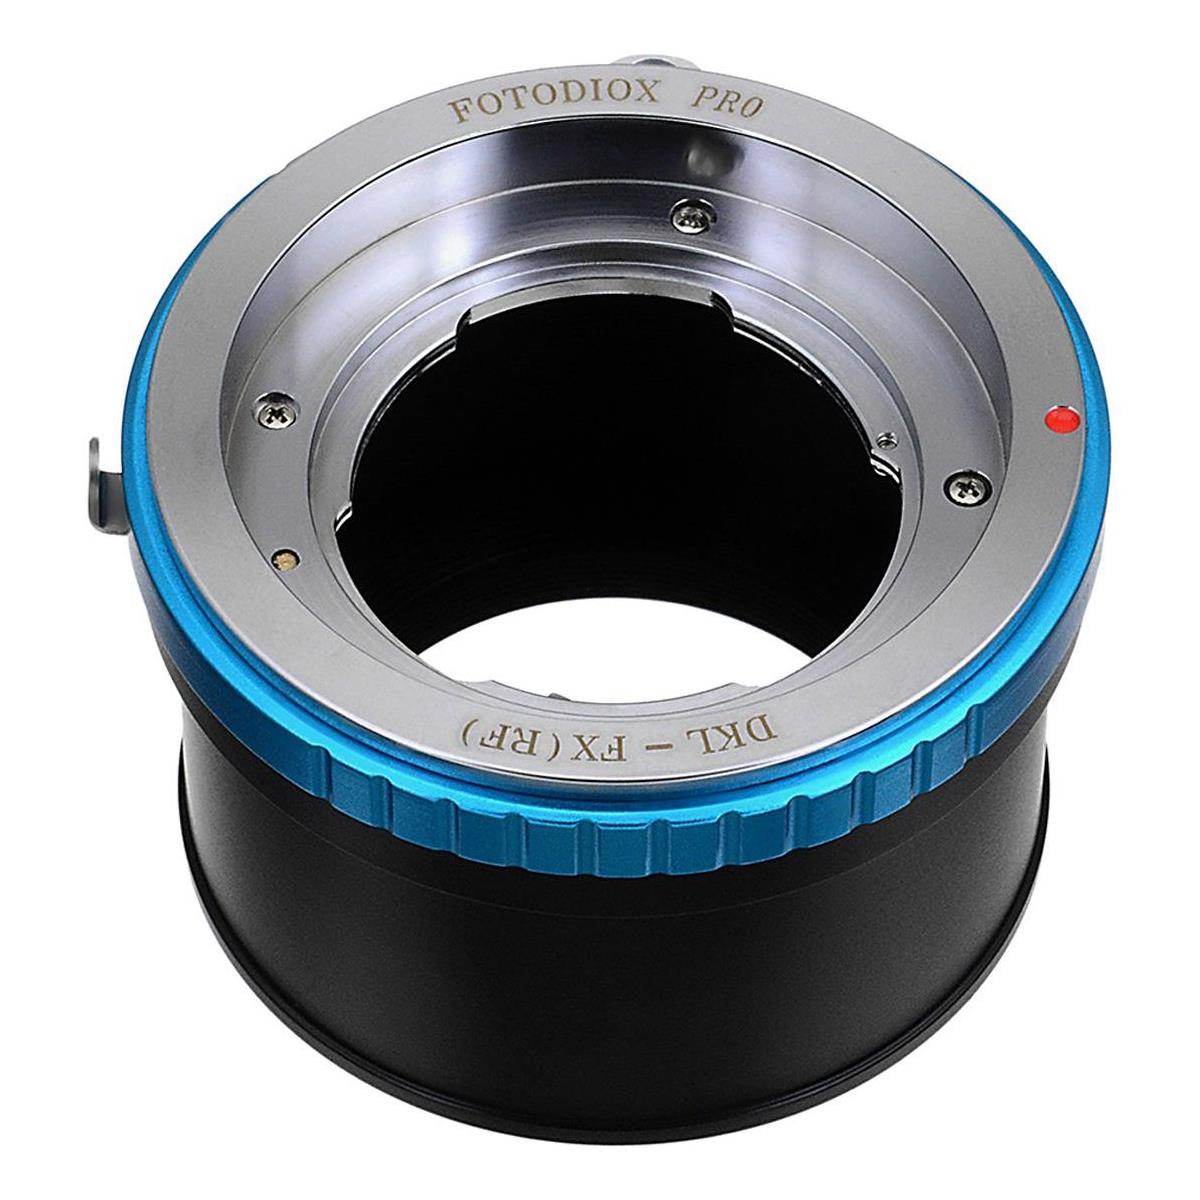 Image of Fotodiox Lens Mount Adapter for Deckel-Mount Lens to Fujifilm X-Mount Camera